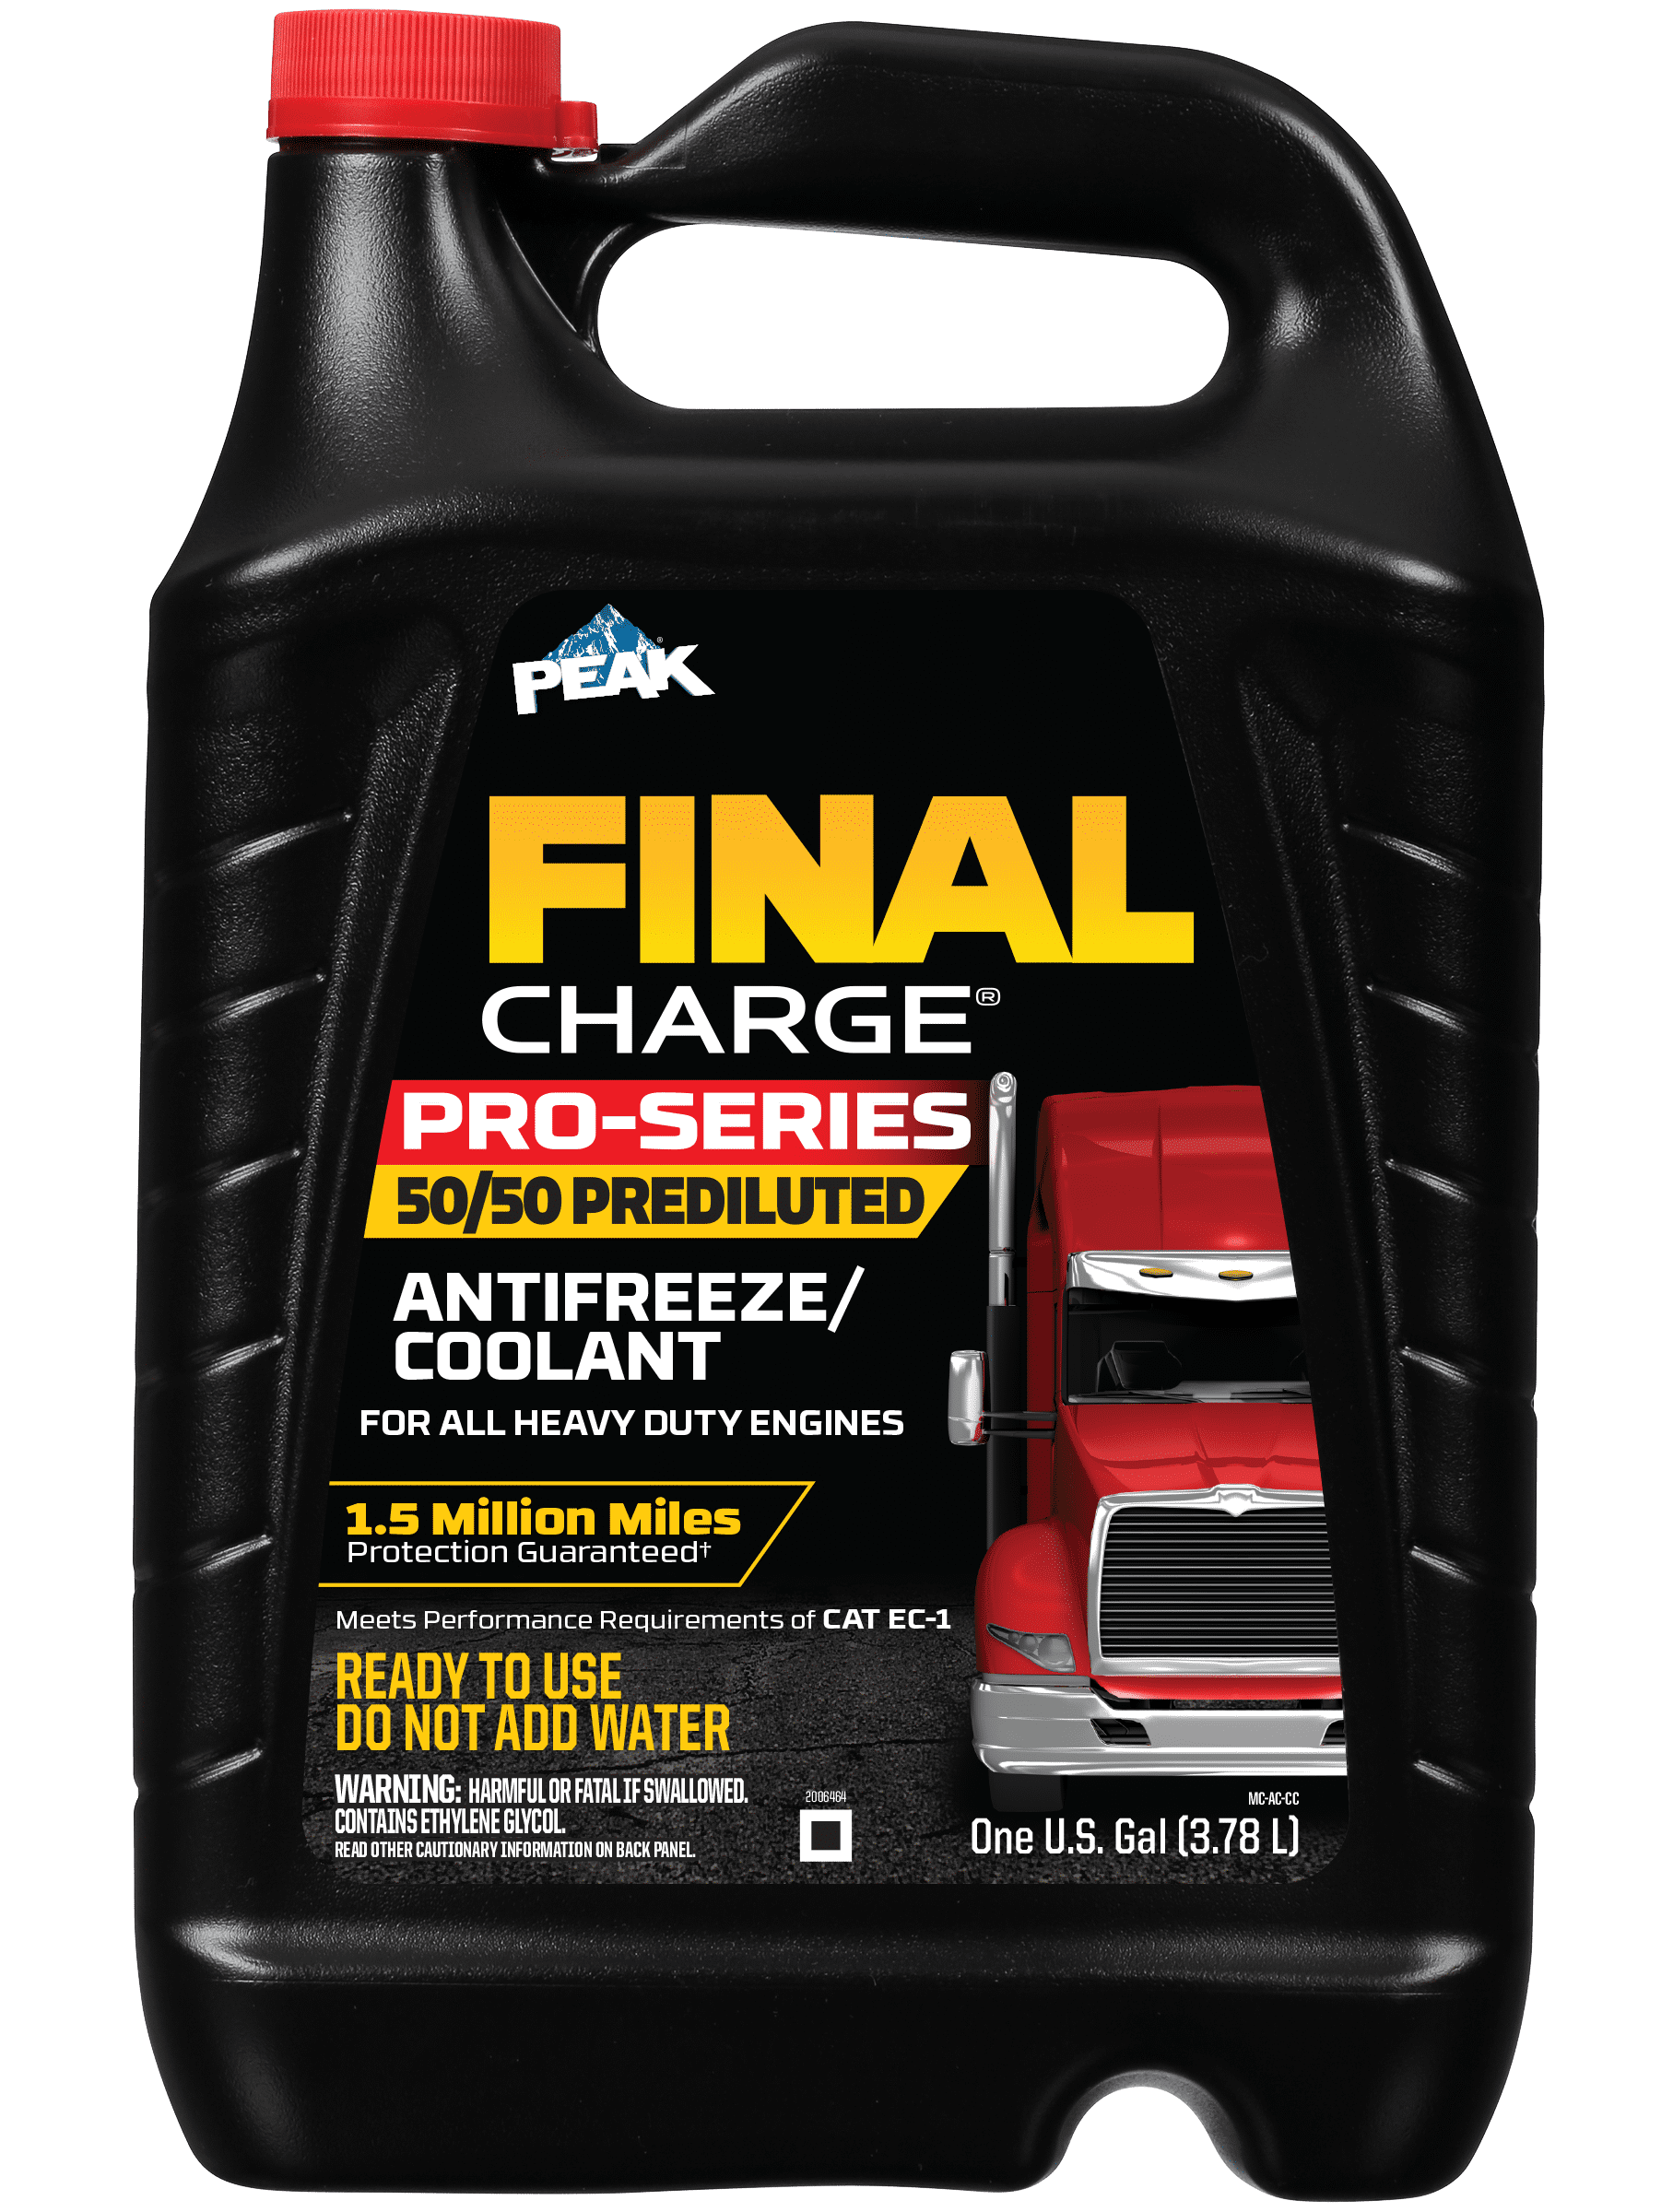 FINAL CHARGE PRO-SERIES 50/50 Pre-Diluted Extended Life Antifreeze & Coolant